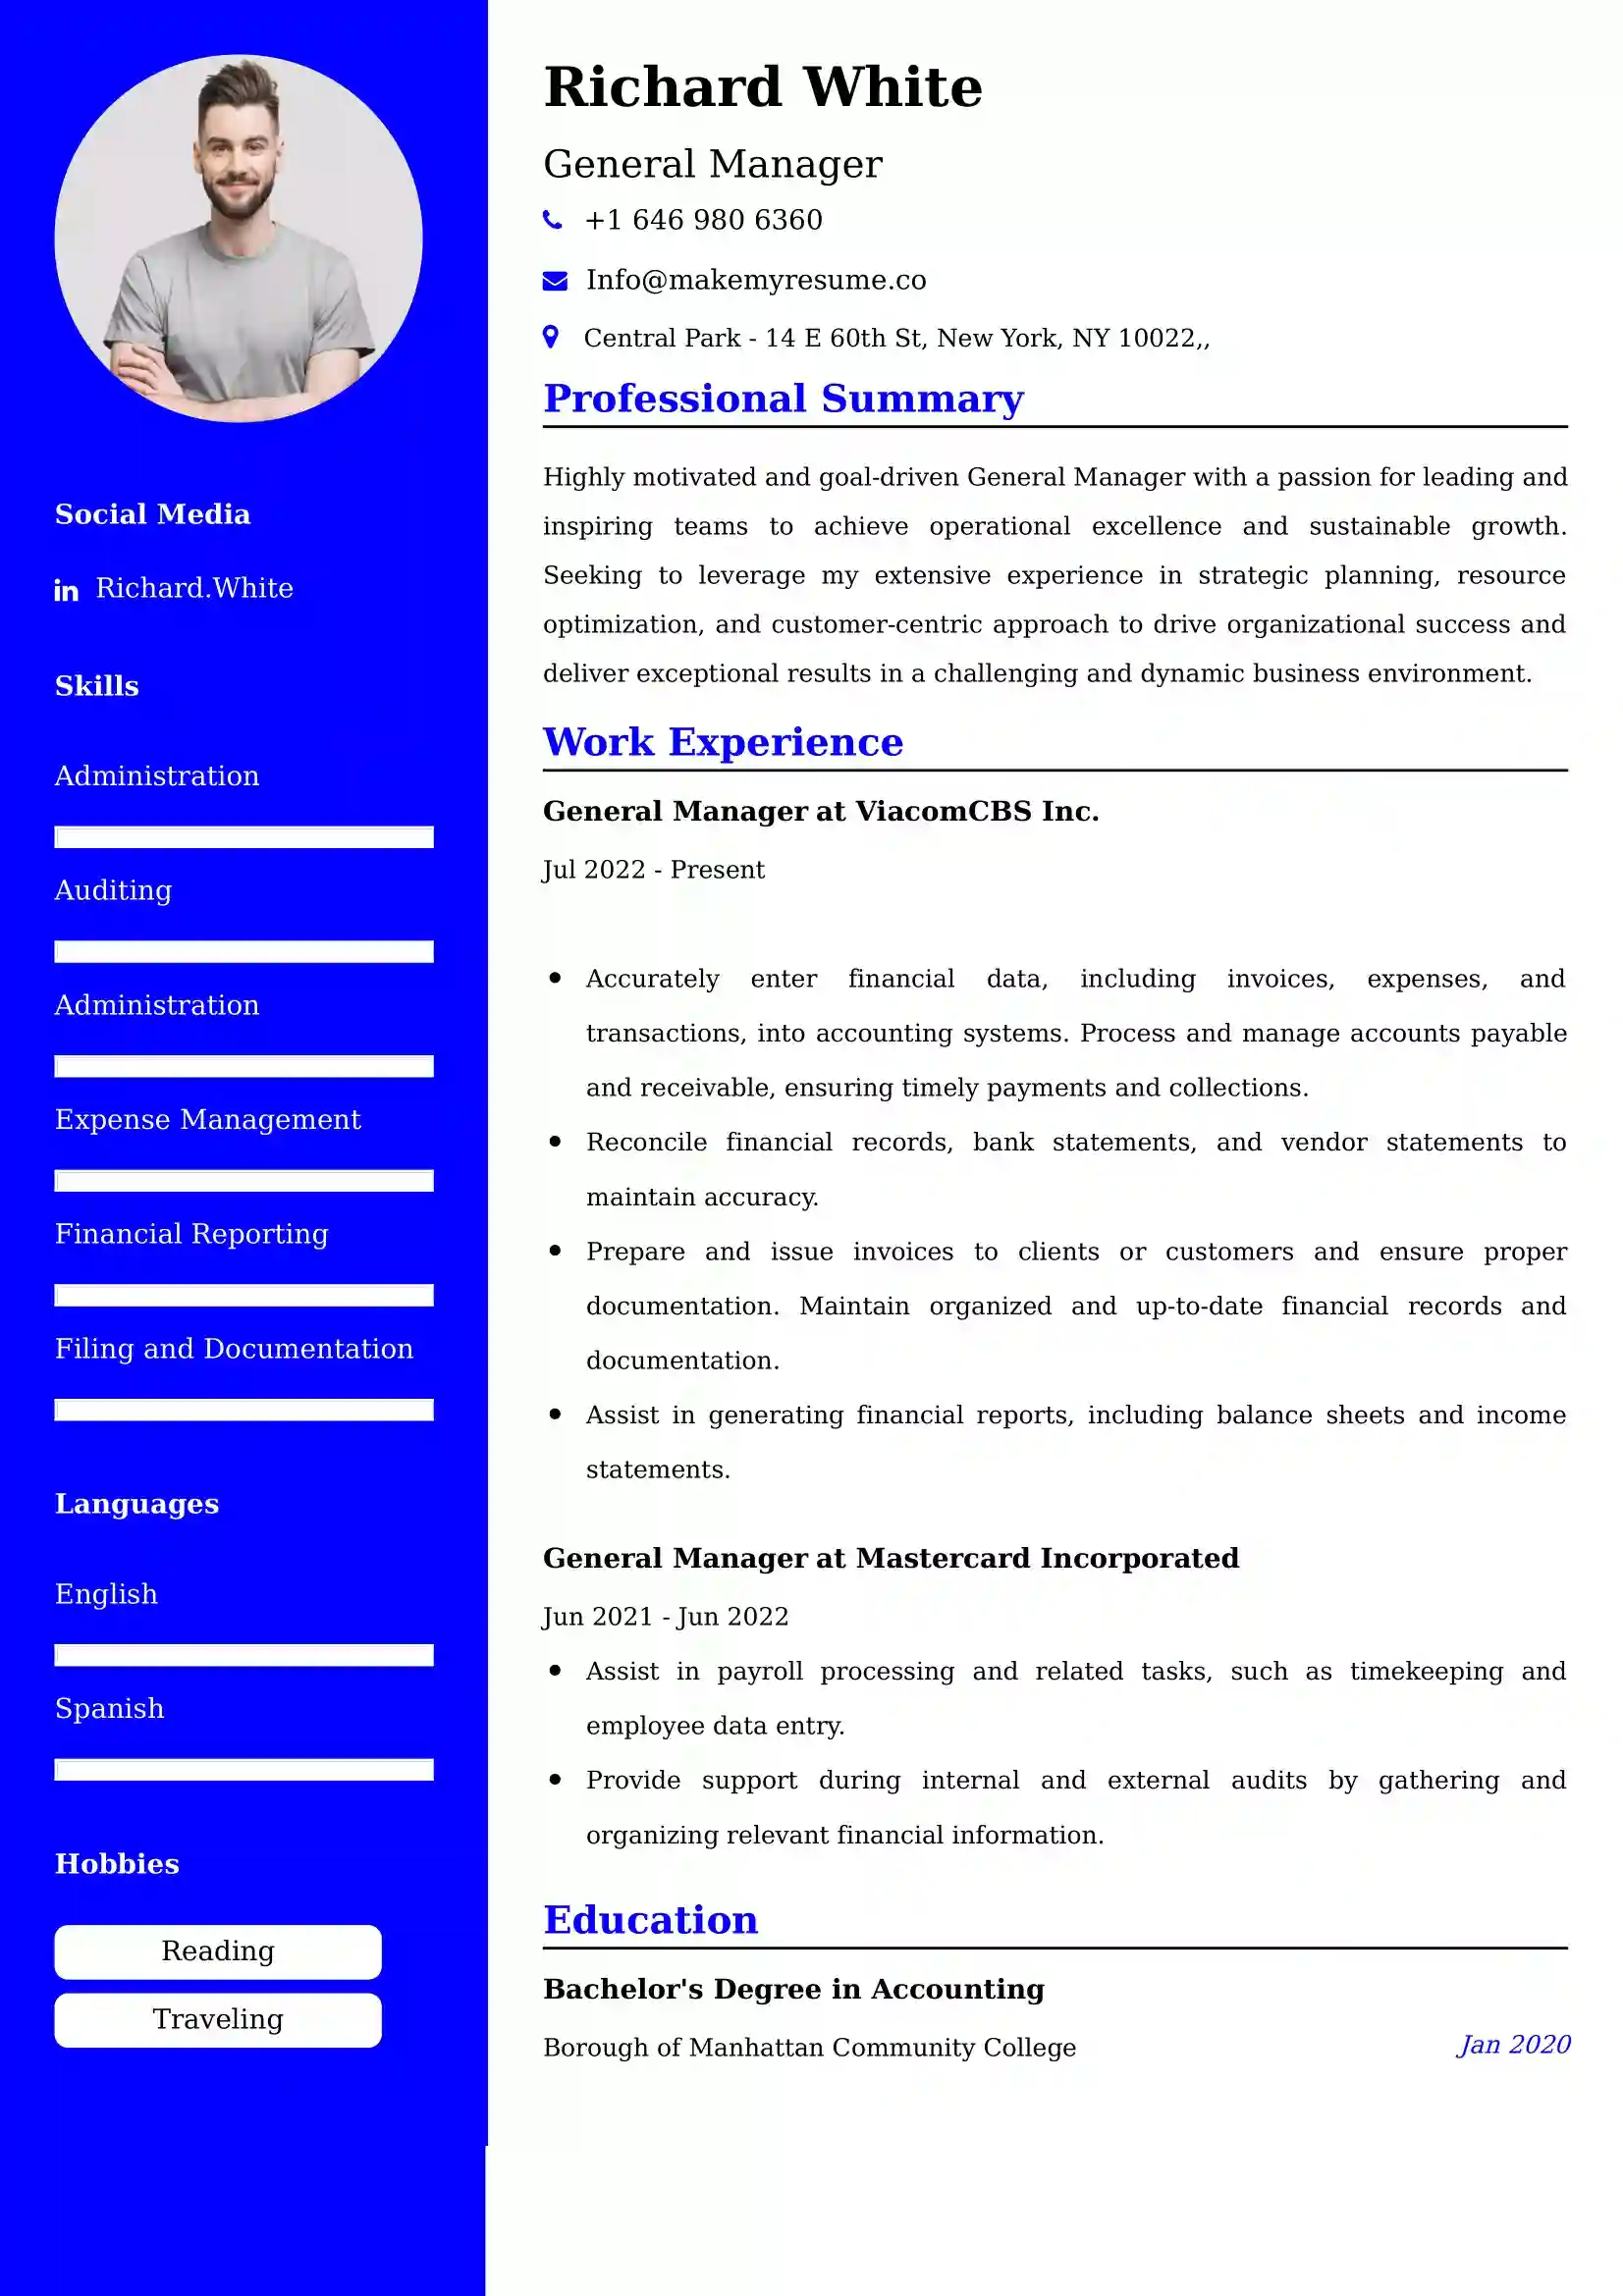 General Manager Resume Examples - Australian Format and Tips